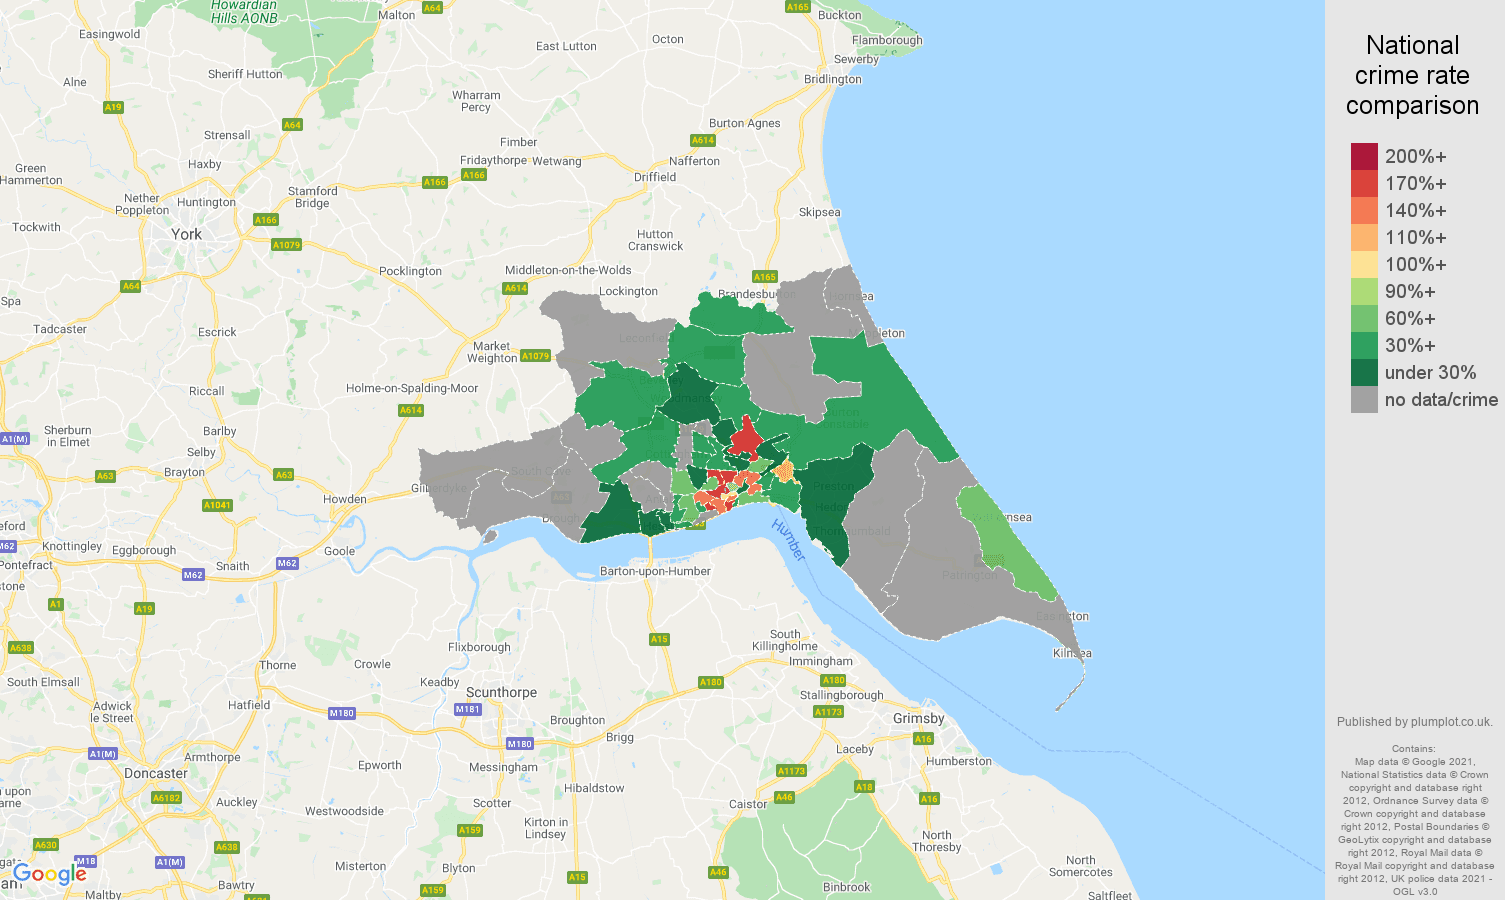 Hull robbery crime rate comparison map